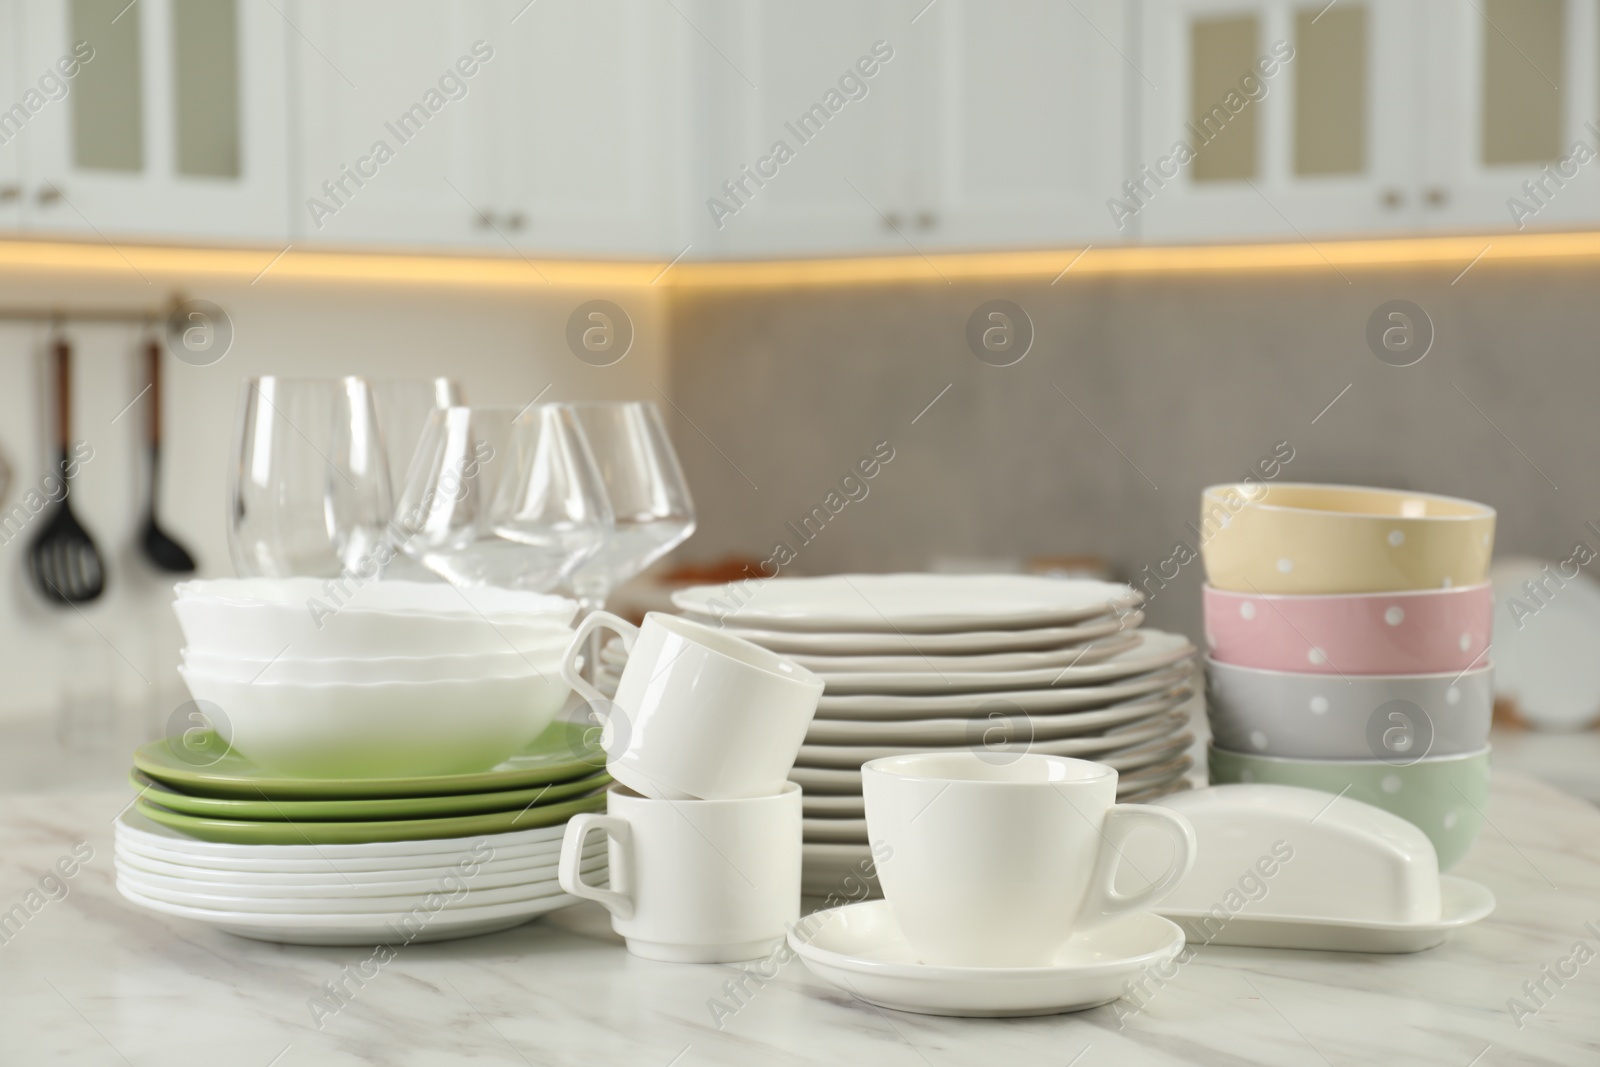 Photo of Clean plates, bowls, cups and glasses on white marble table in kitchen